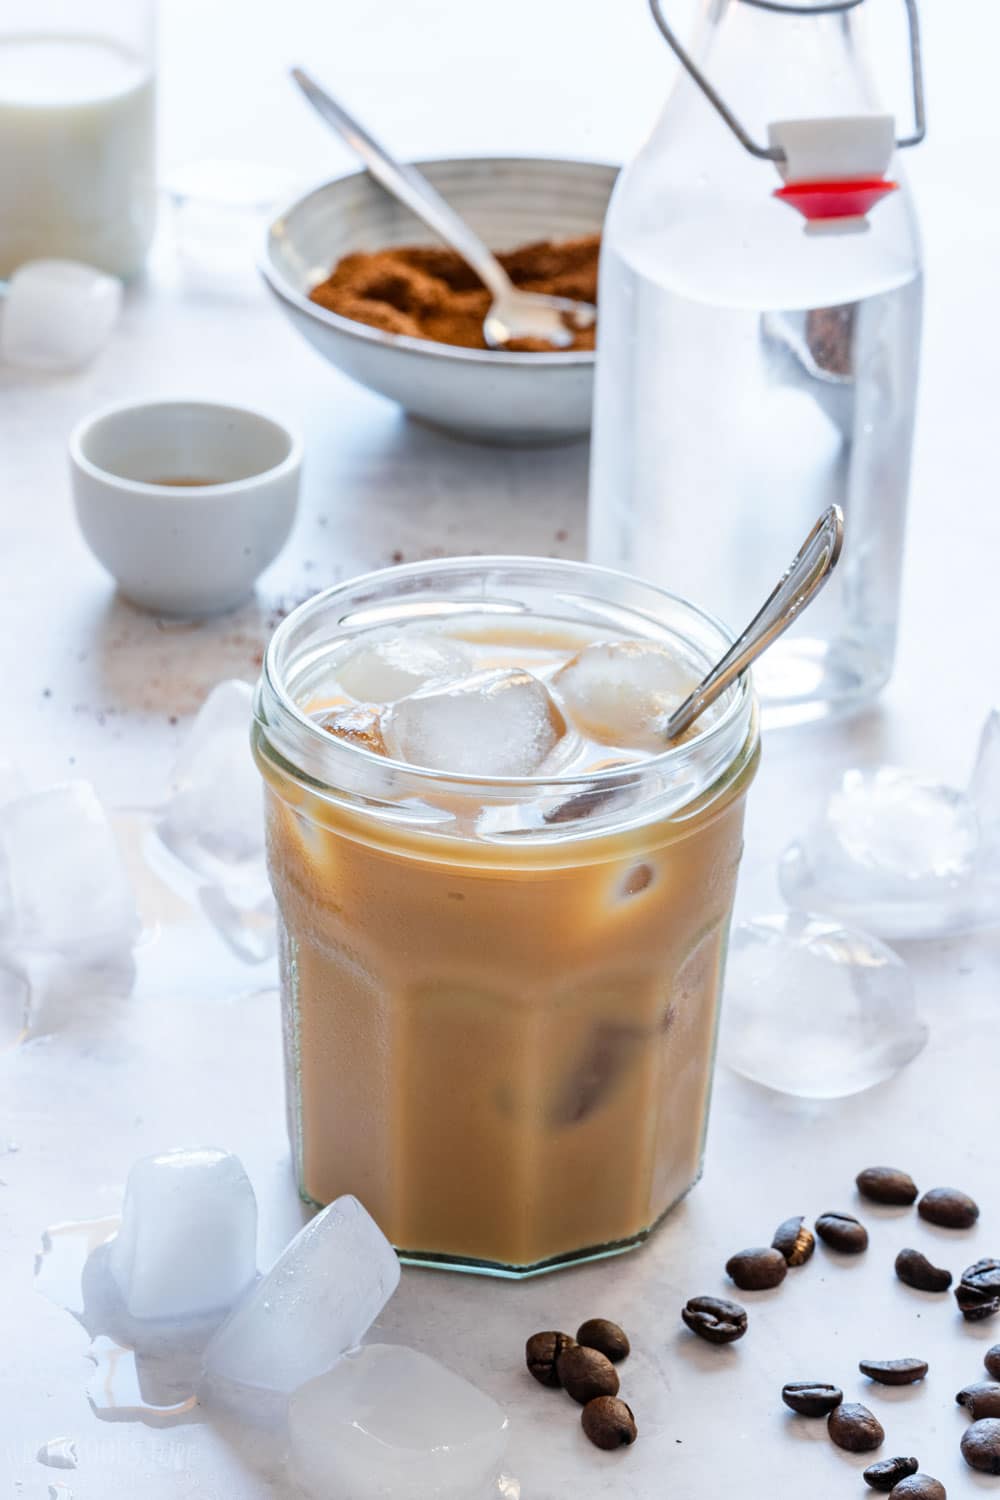 Iced latte with oat milk and instant coffee.